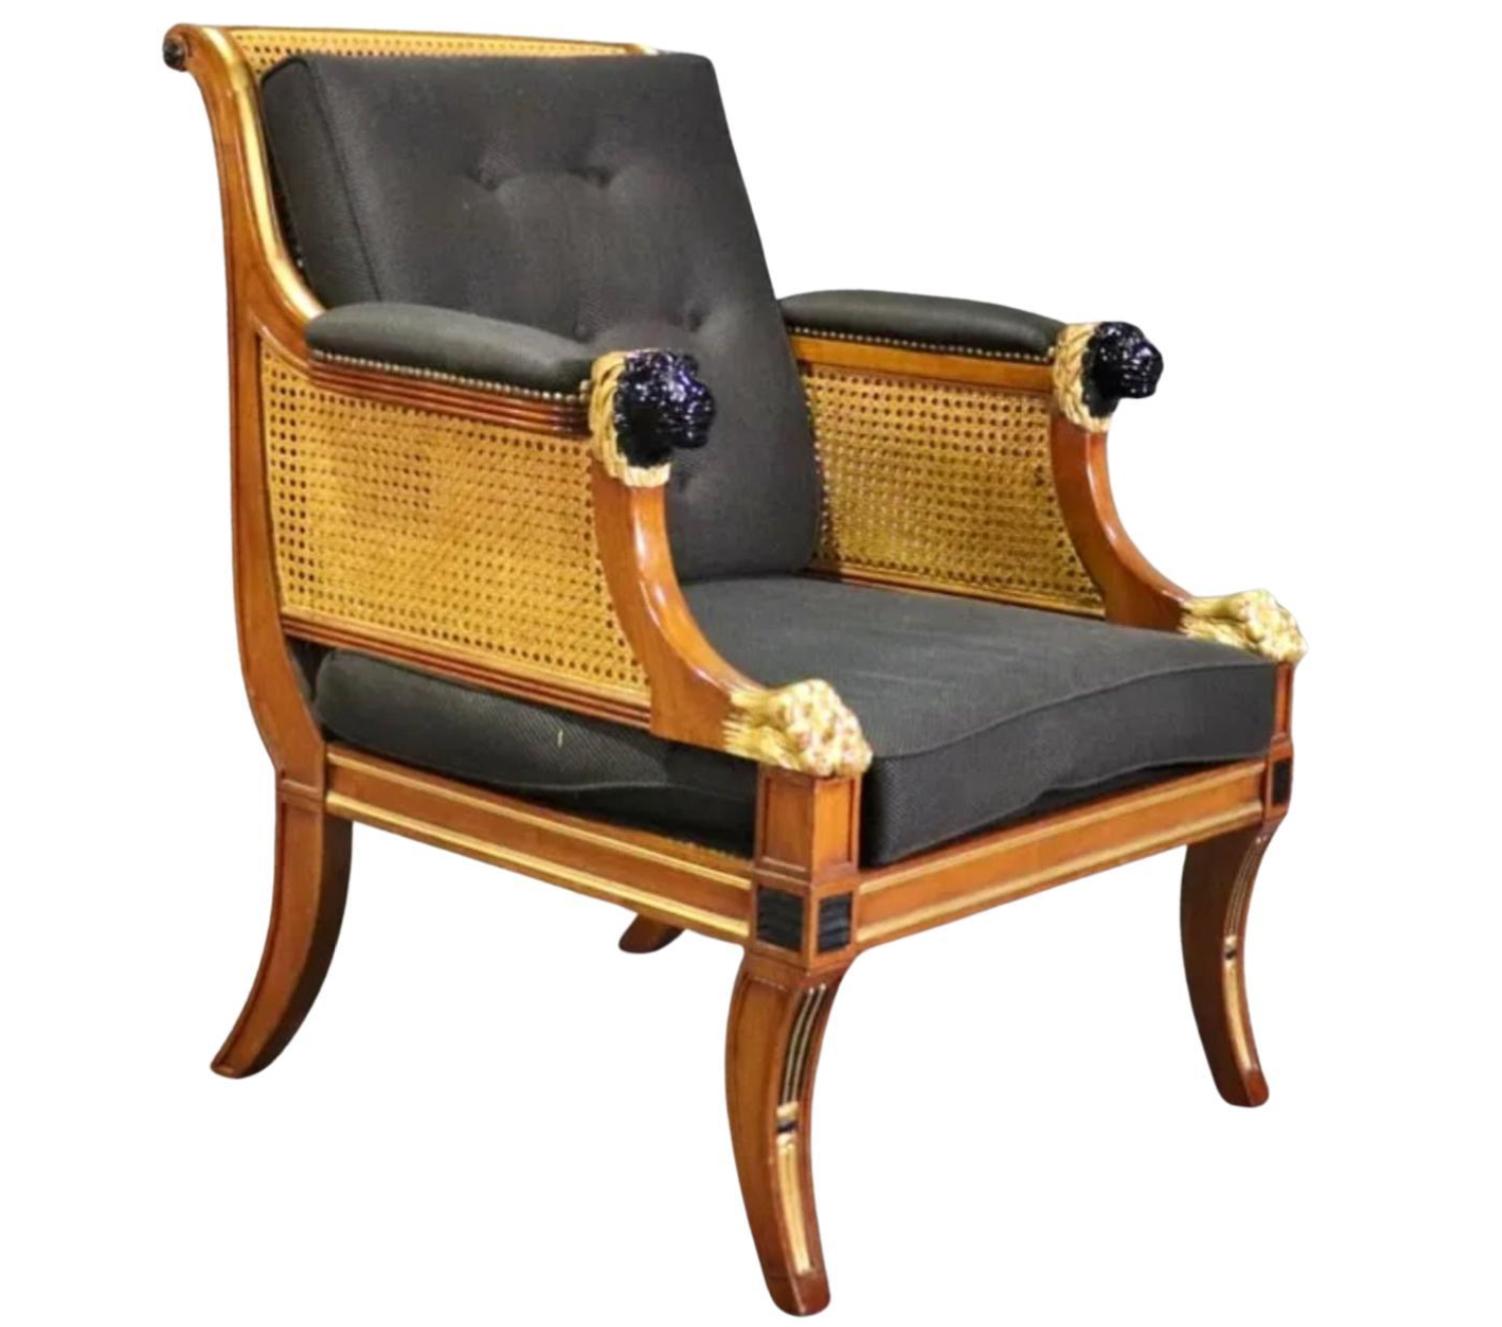 Mid-20th Century 19th C Style Regency Mahogany & Cane Giltwood Bergere Armchair For Sale